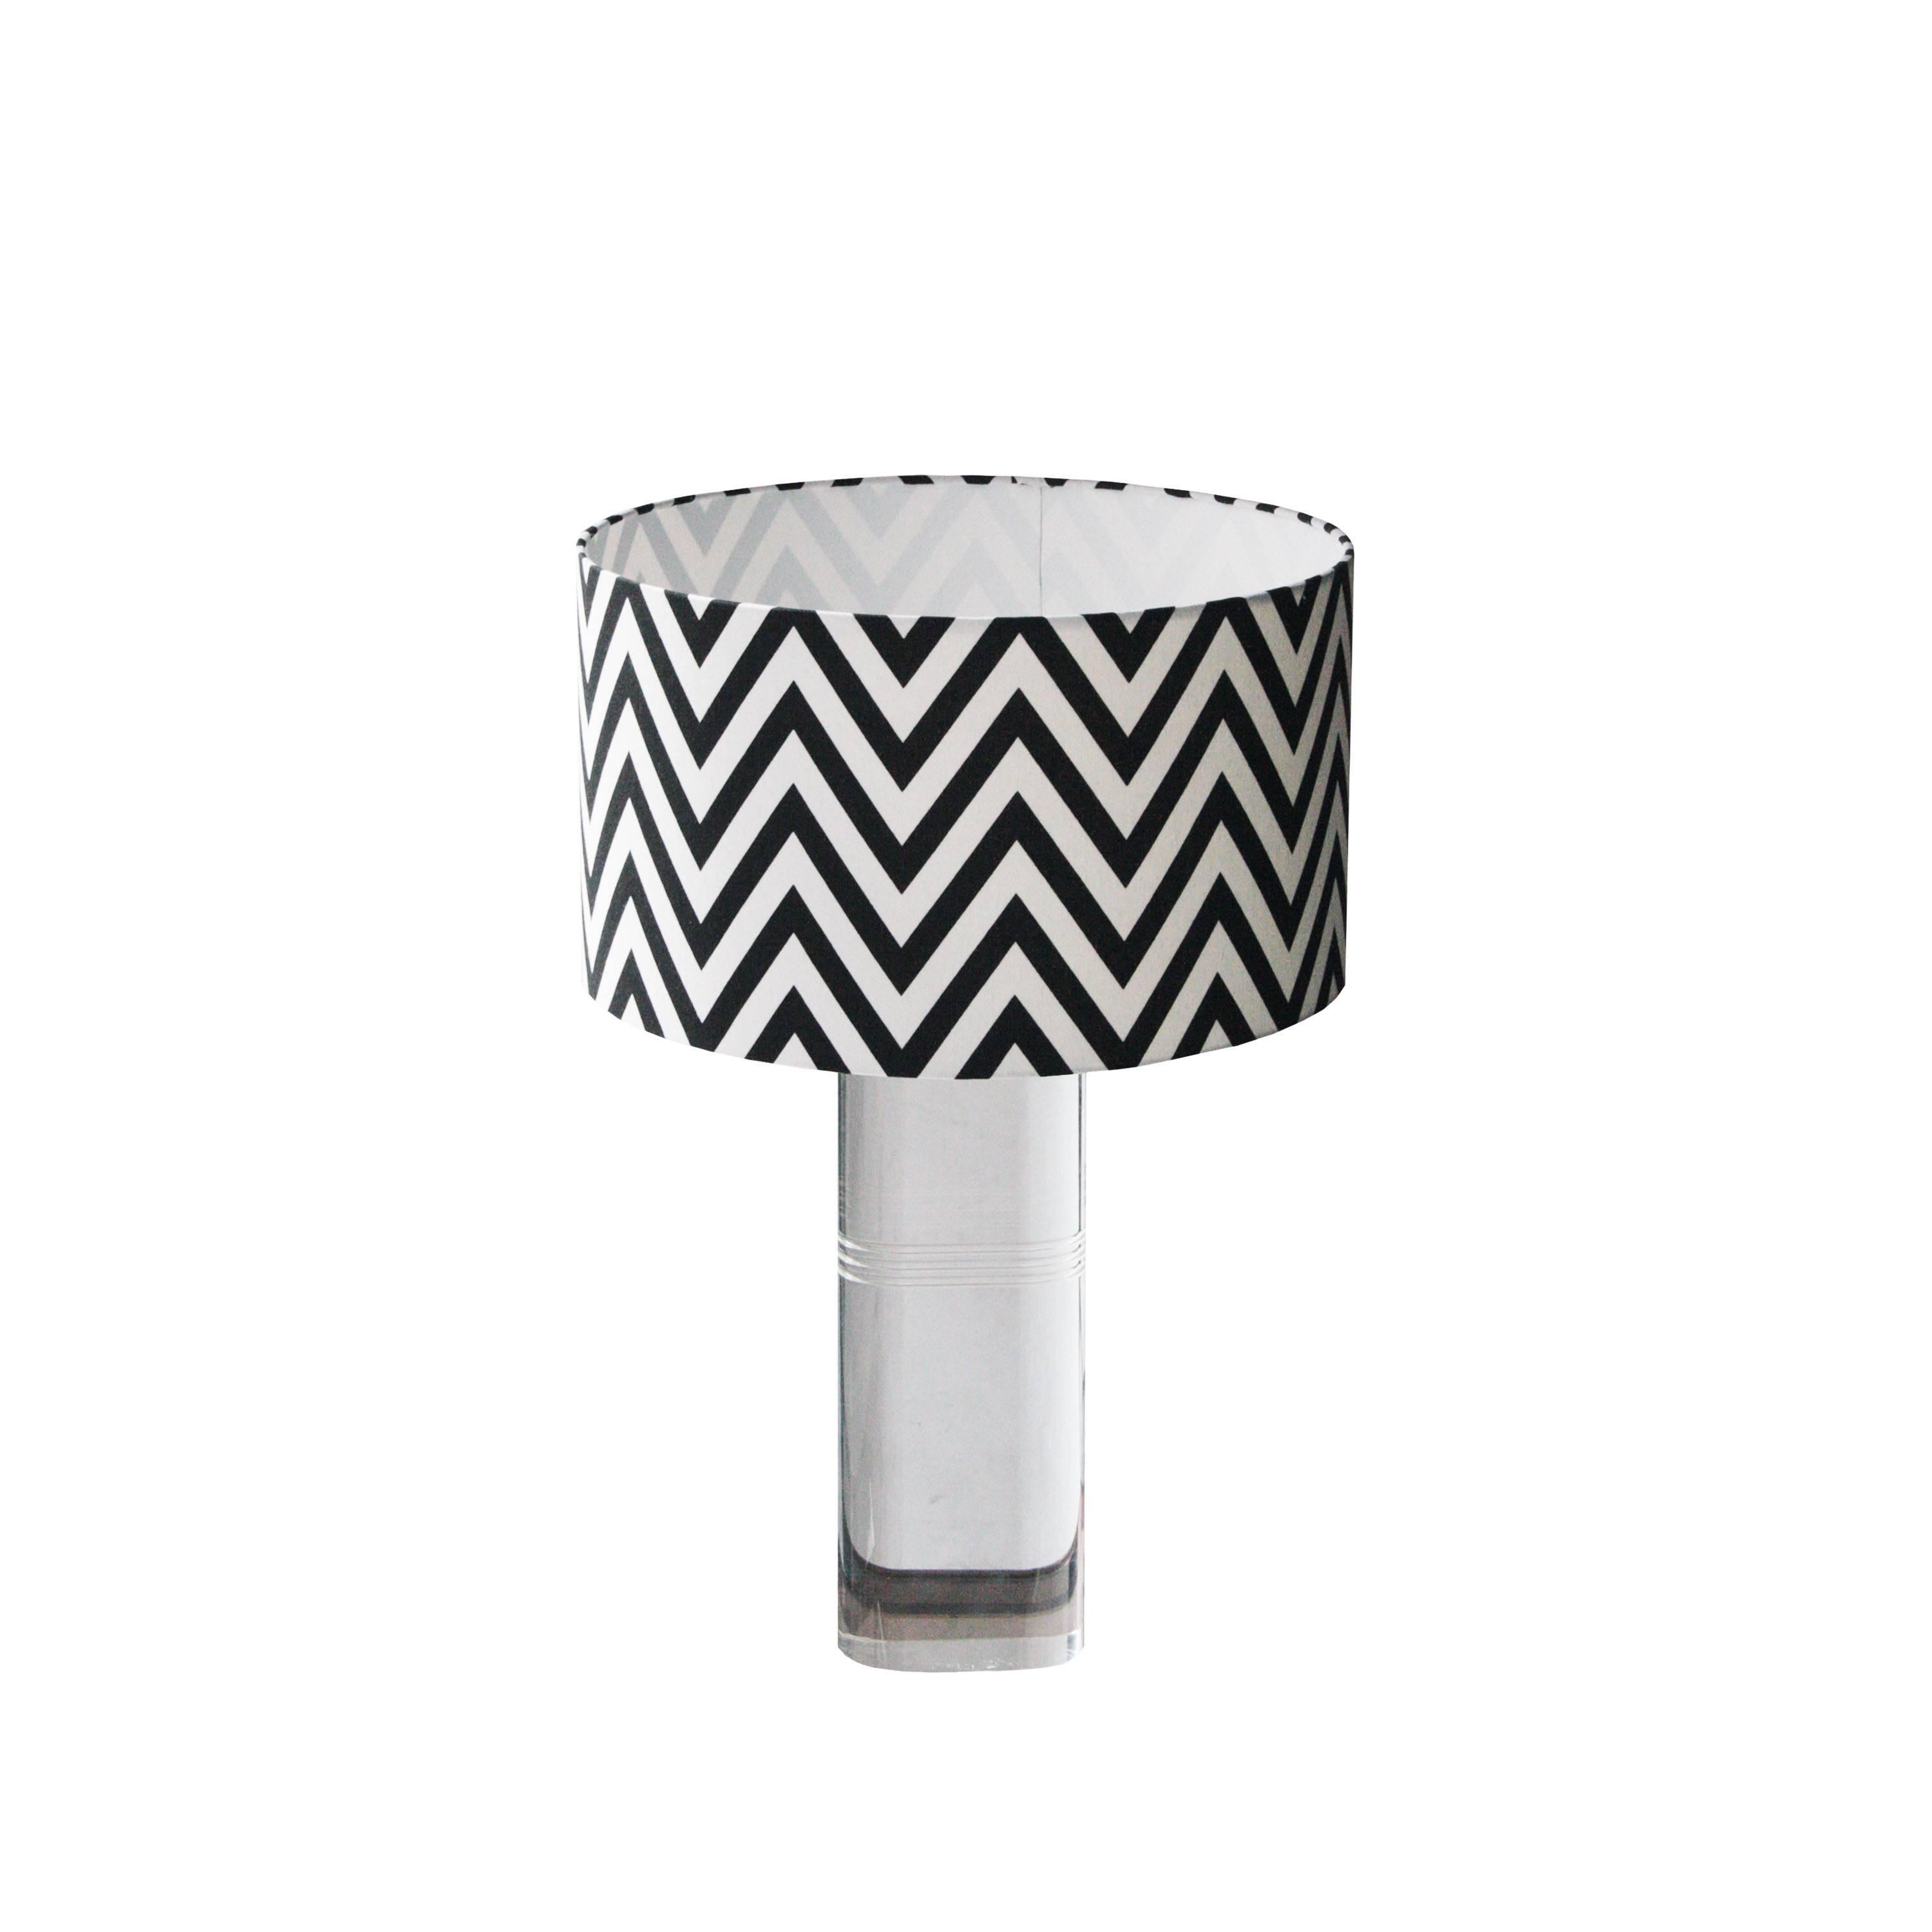 Pair of transparent methacrylate lamps with brass details and handmade lampshade in black and white zig zag.